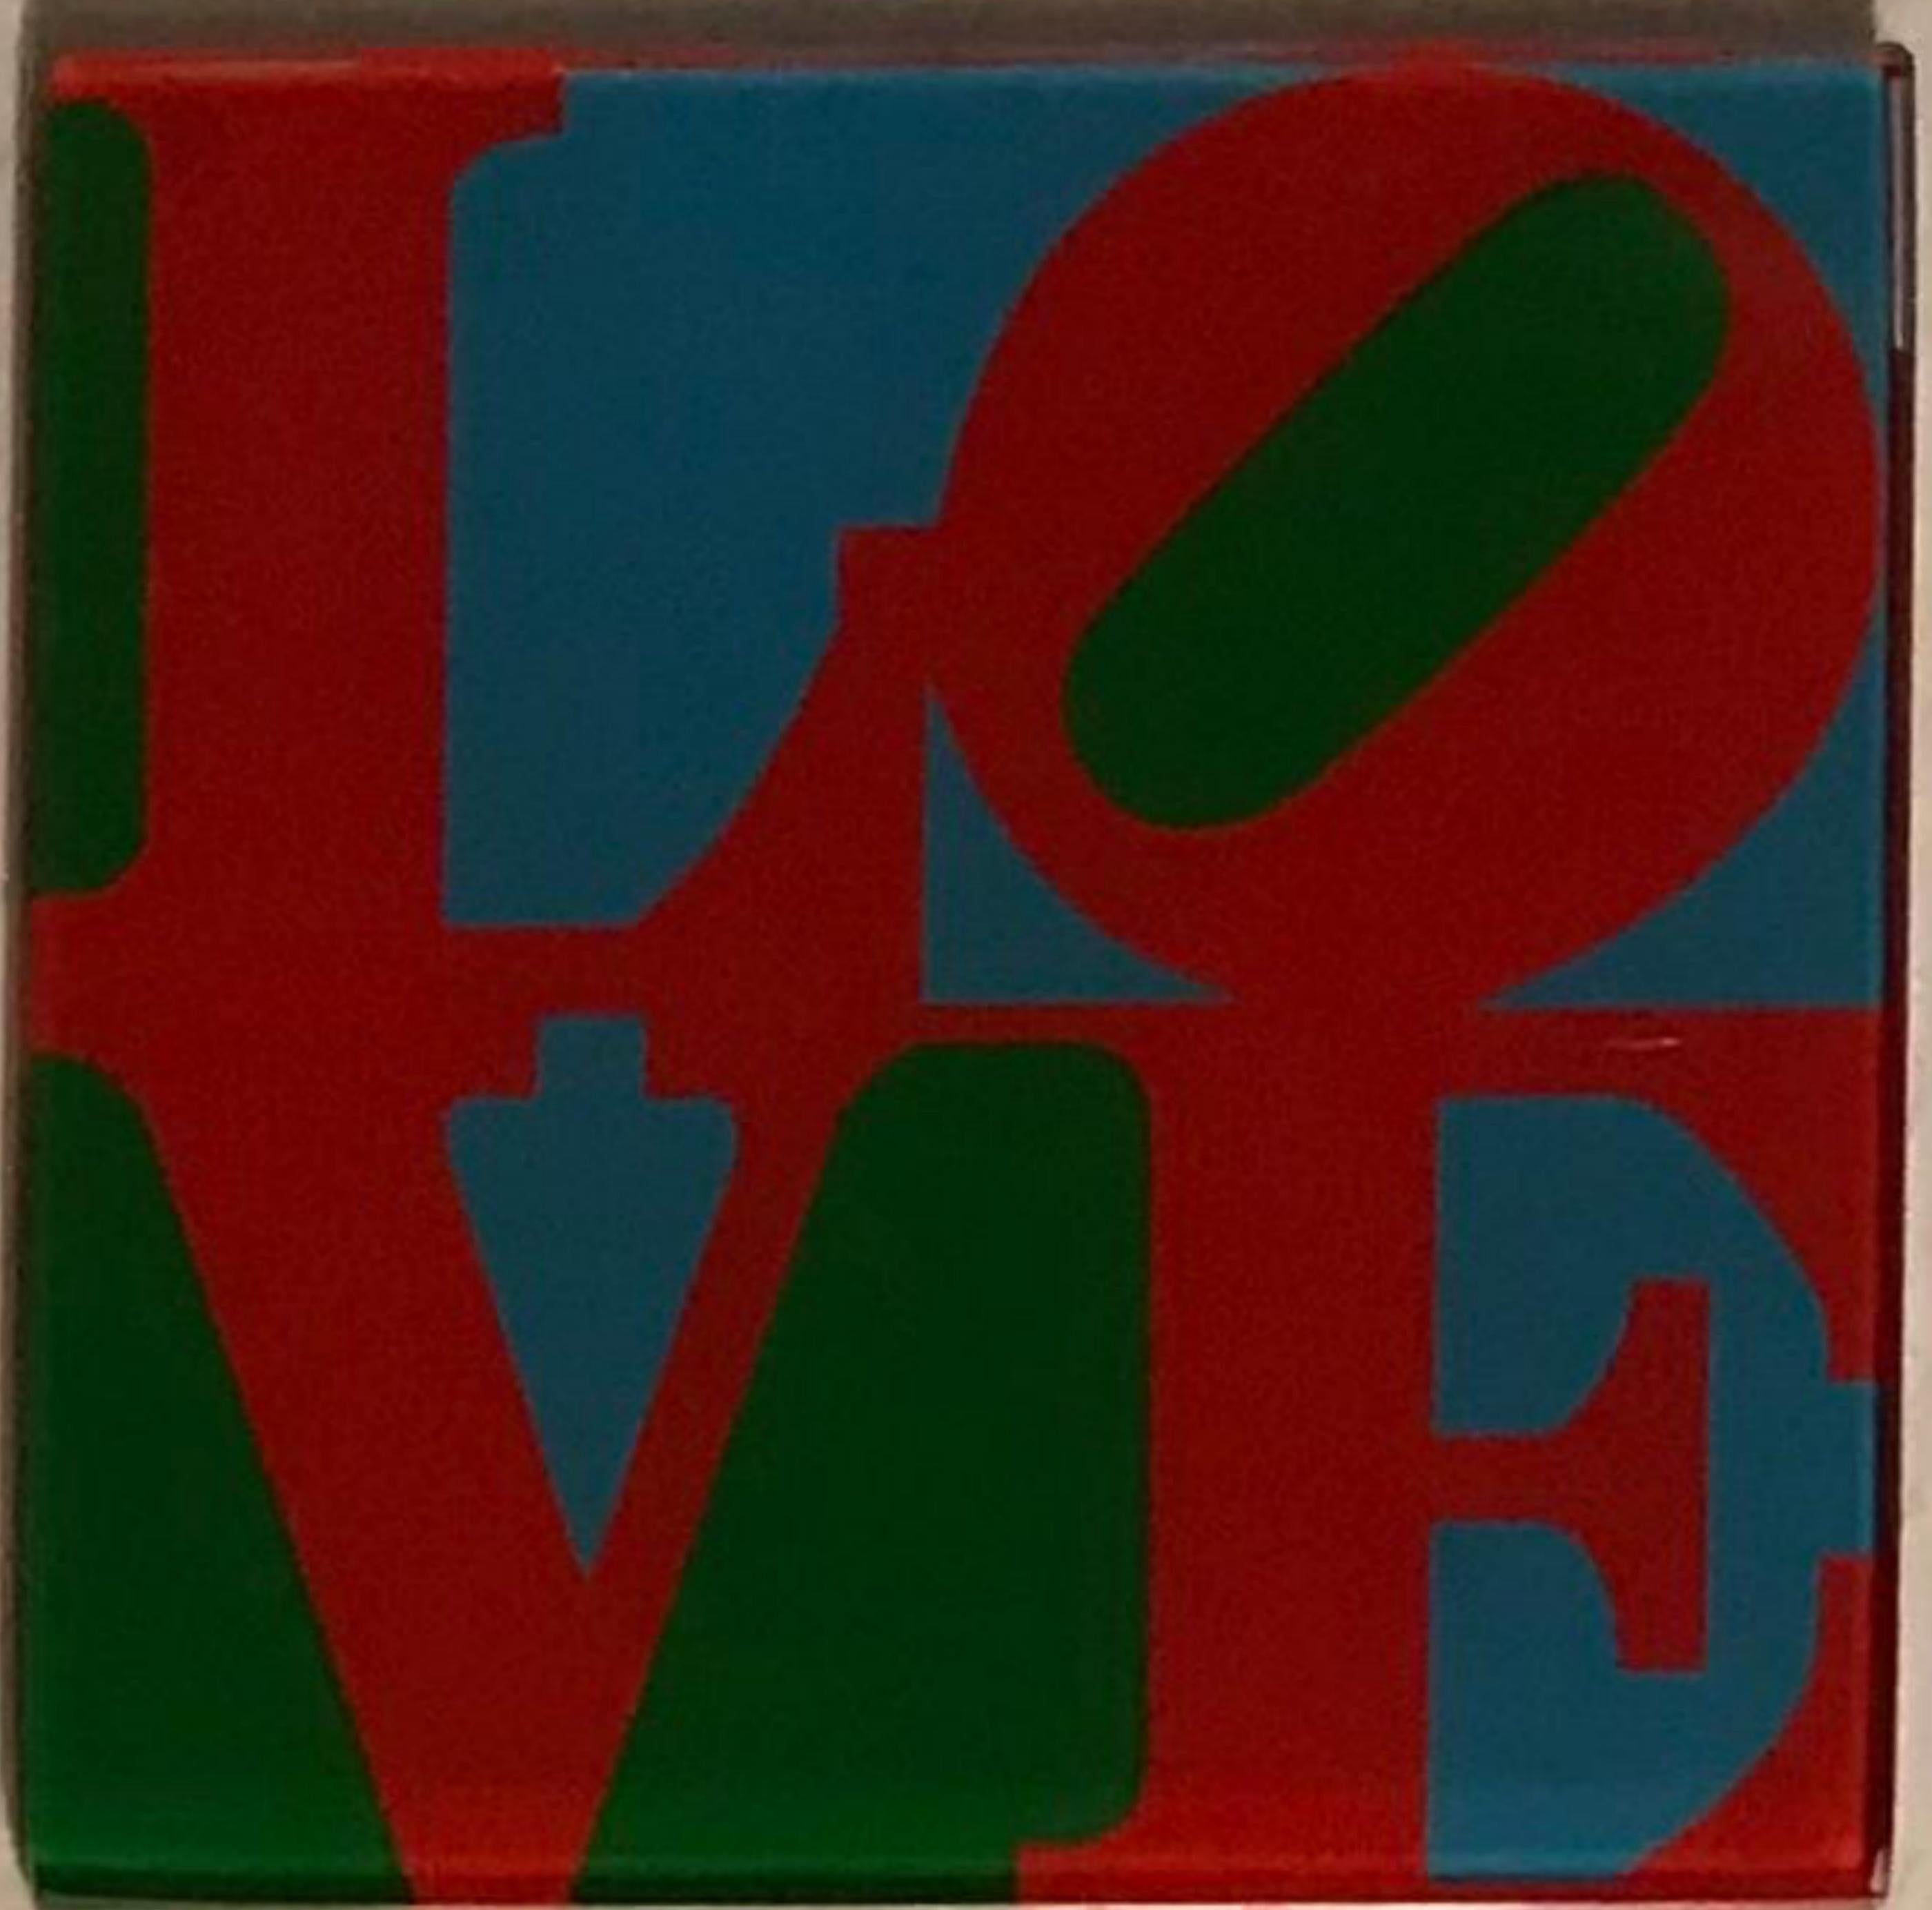 Set of Four Glass Coasters (official; stamped by the Indianapolis Museum of Art) - Pop Art Mixed Media Art by Robert Indiana